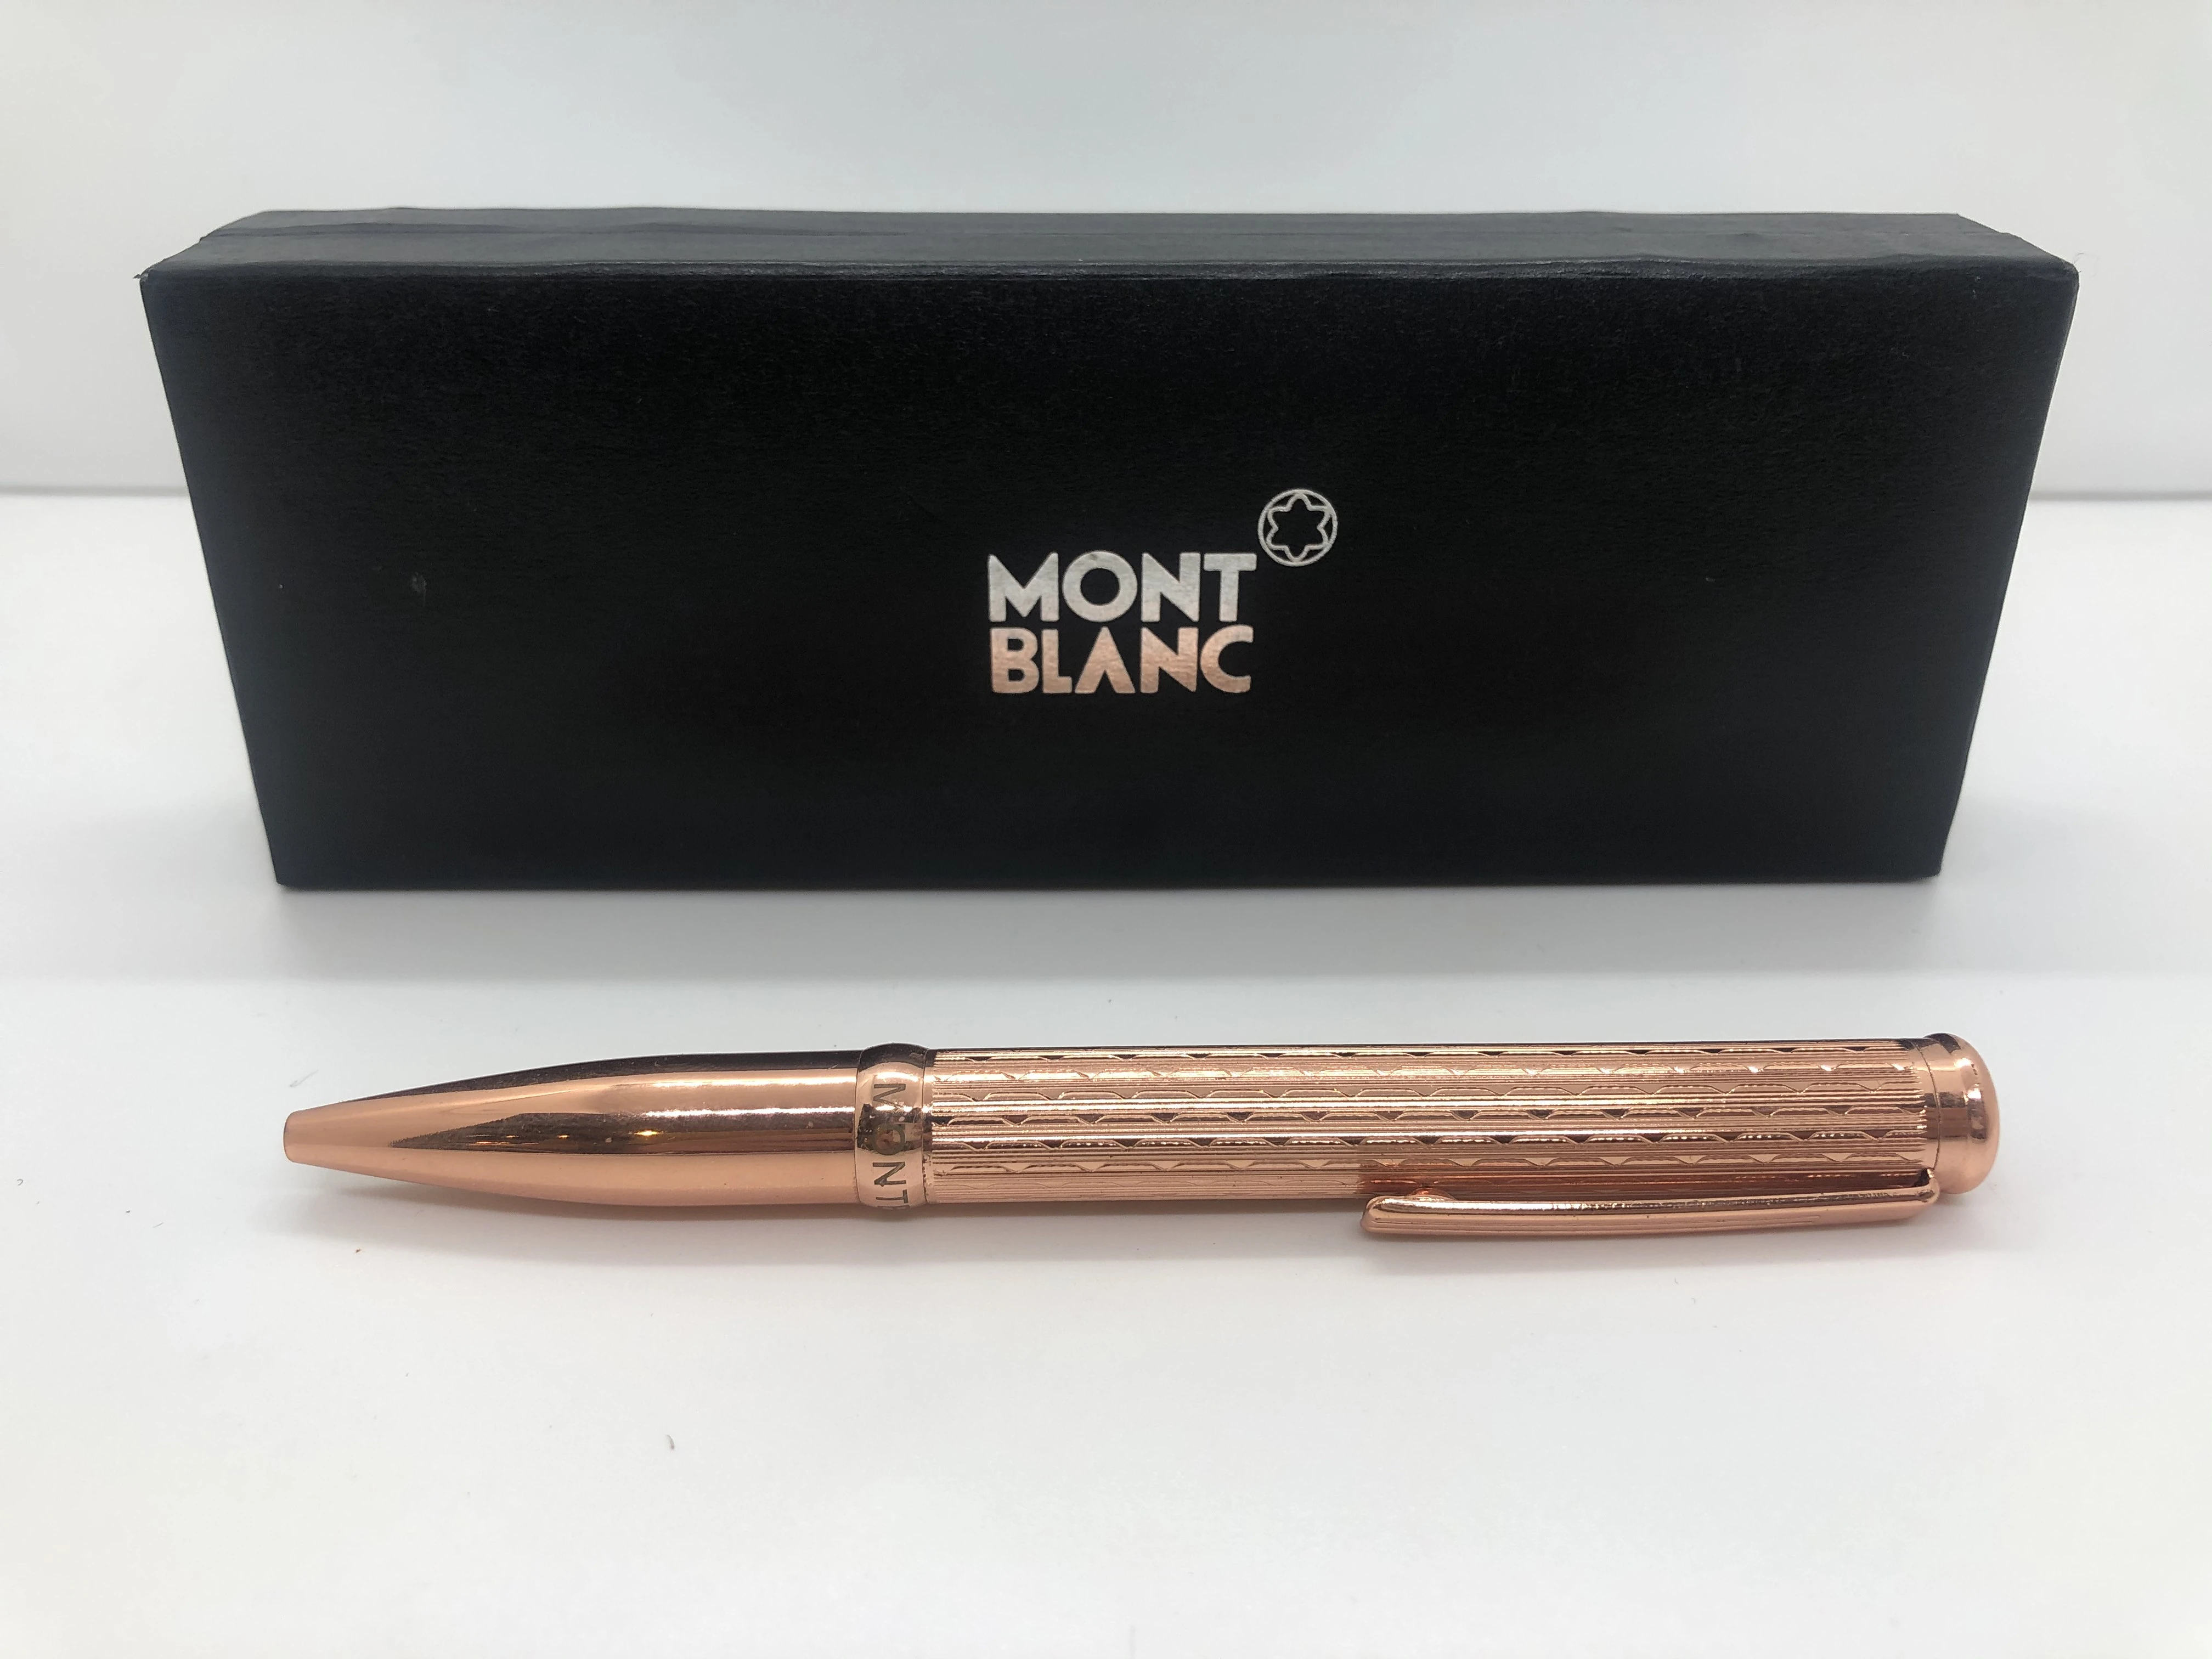 Mont Blanc pen rose gold - with engraved touches - with the star brand logo on the top engraved in the rotation